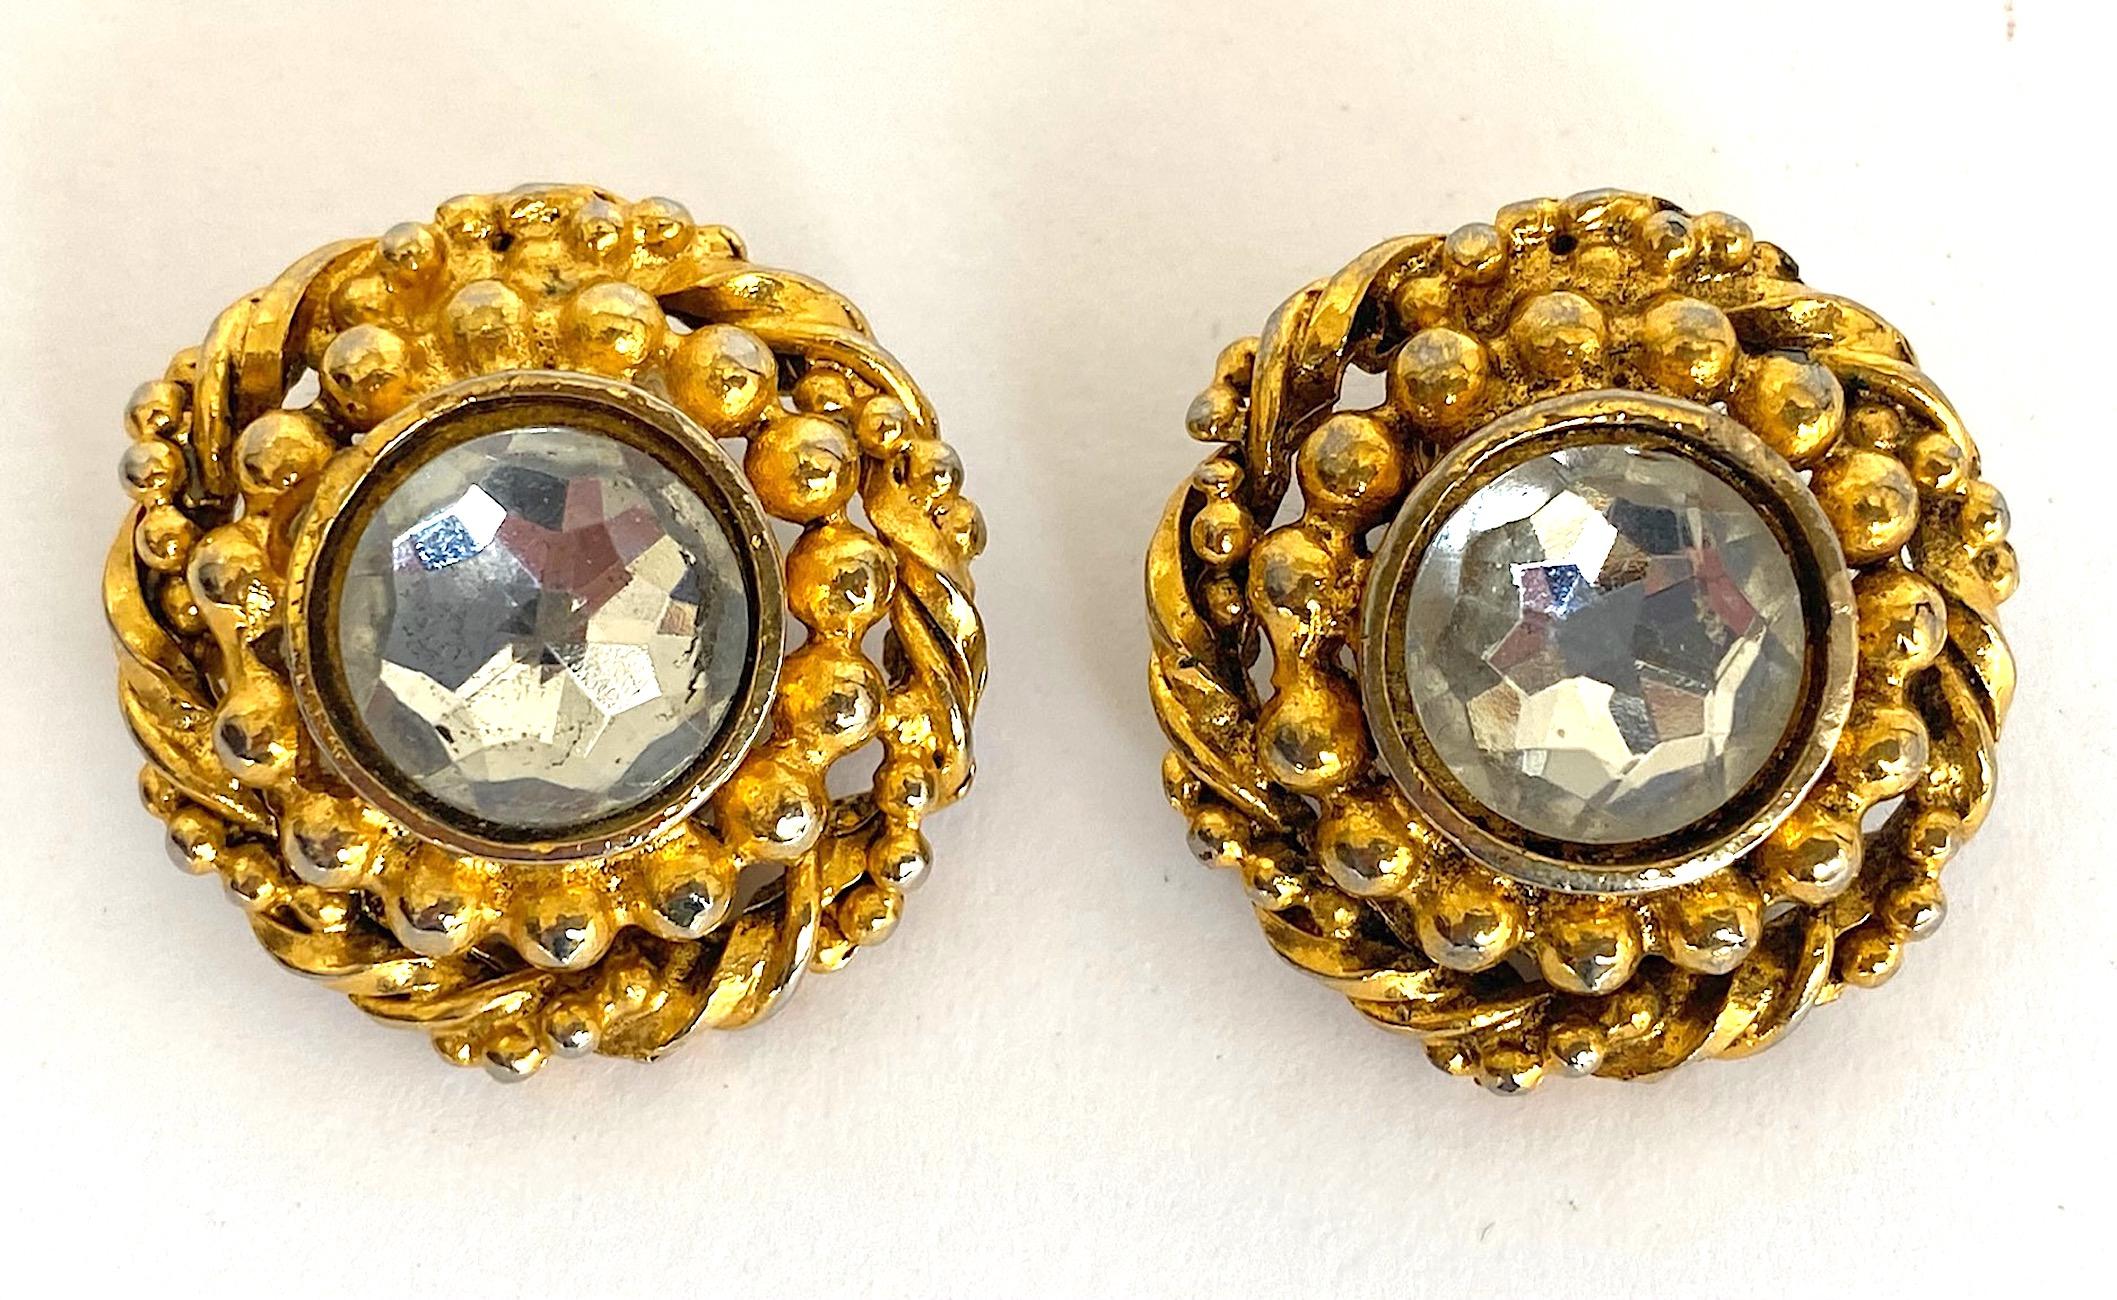 A classic and beautiful pair of pre 1986 Chanel earring. Each is earring is constructed with a central .44 of an inch diameter faceted rose cut and bevel set rhinestone. It is surrounded by a ring of beads floating in a rope twist outer ring. The